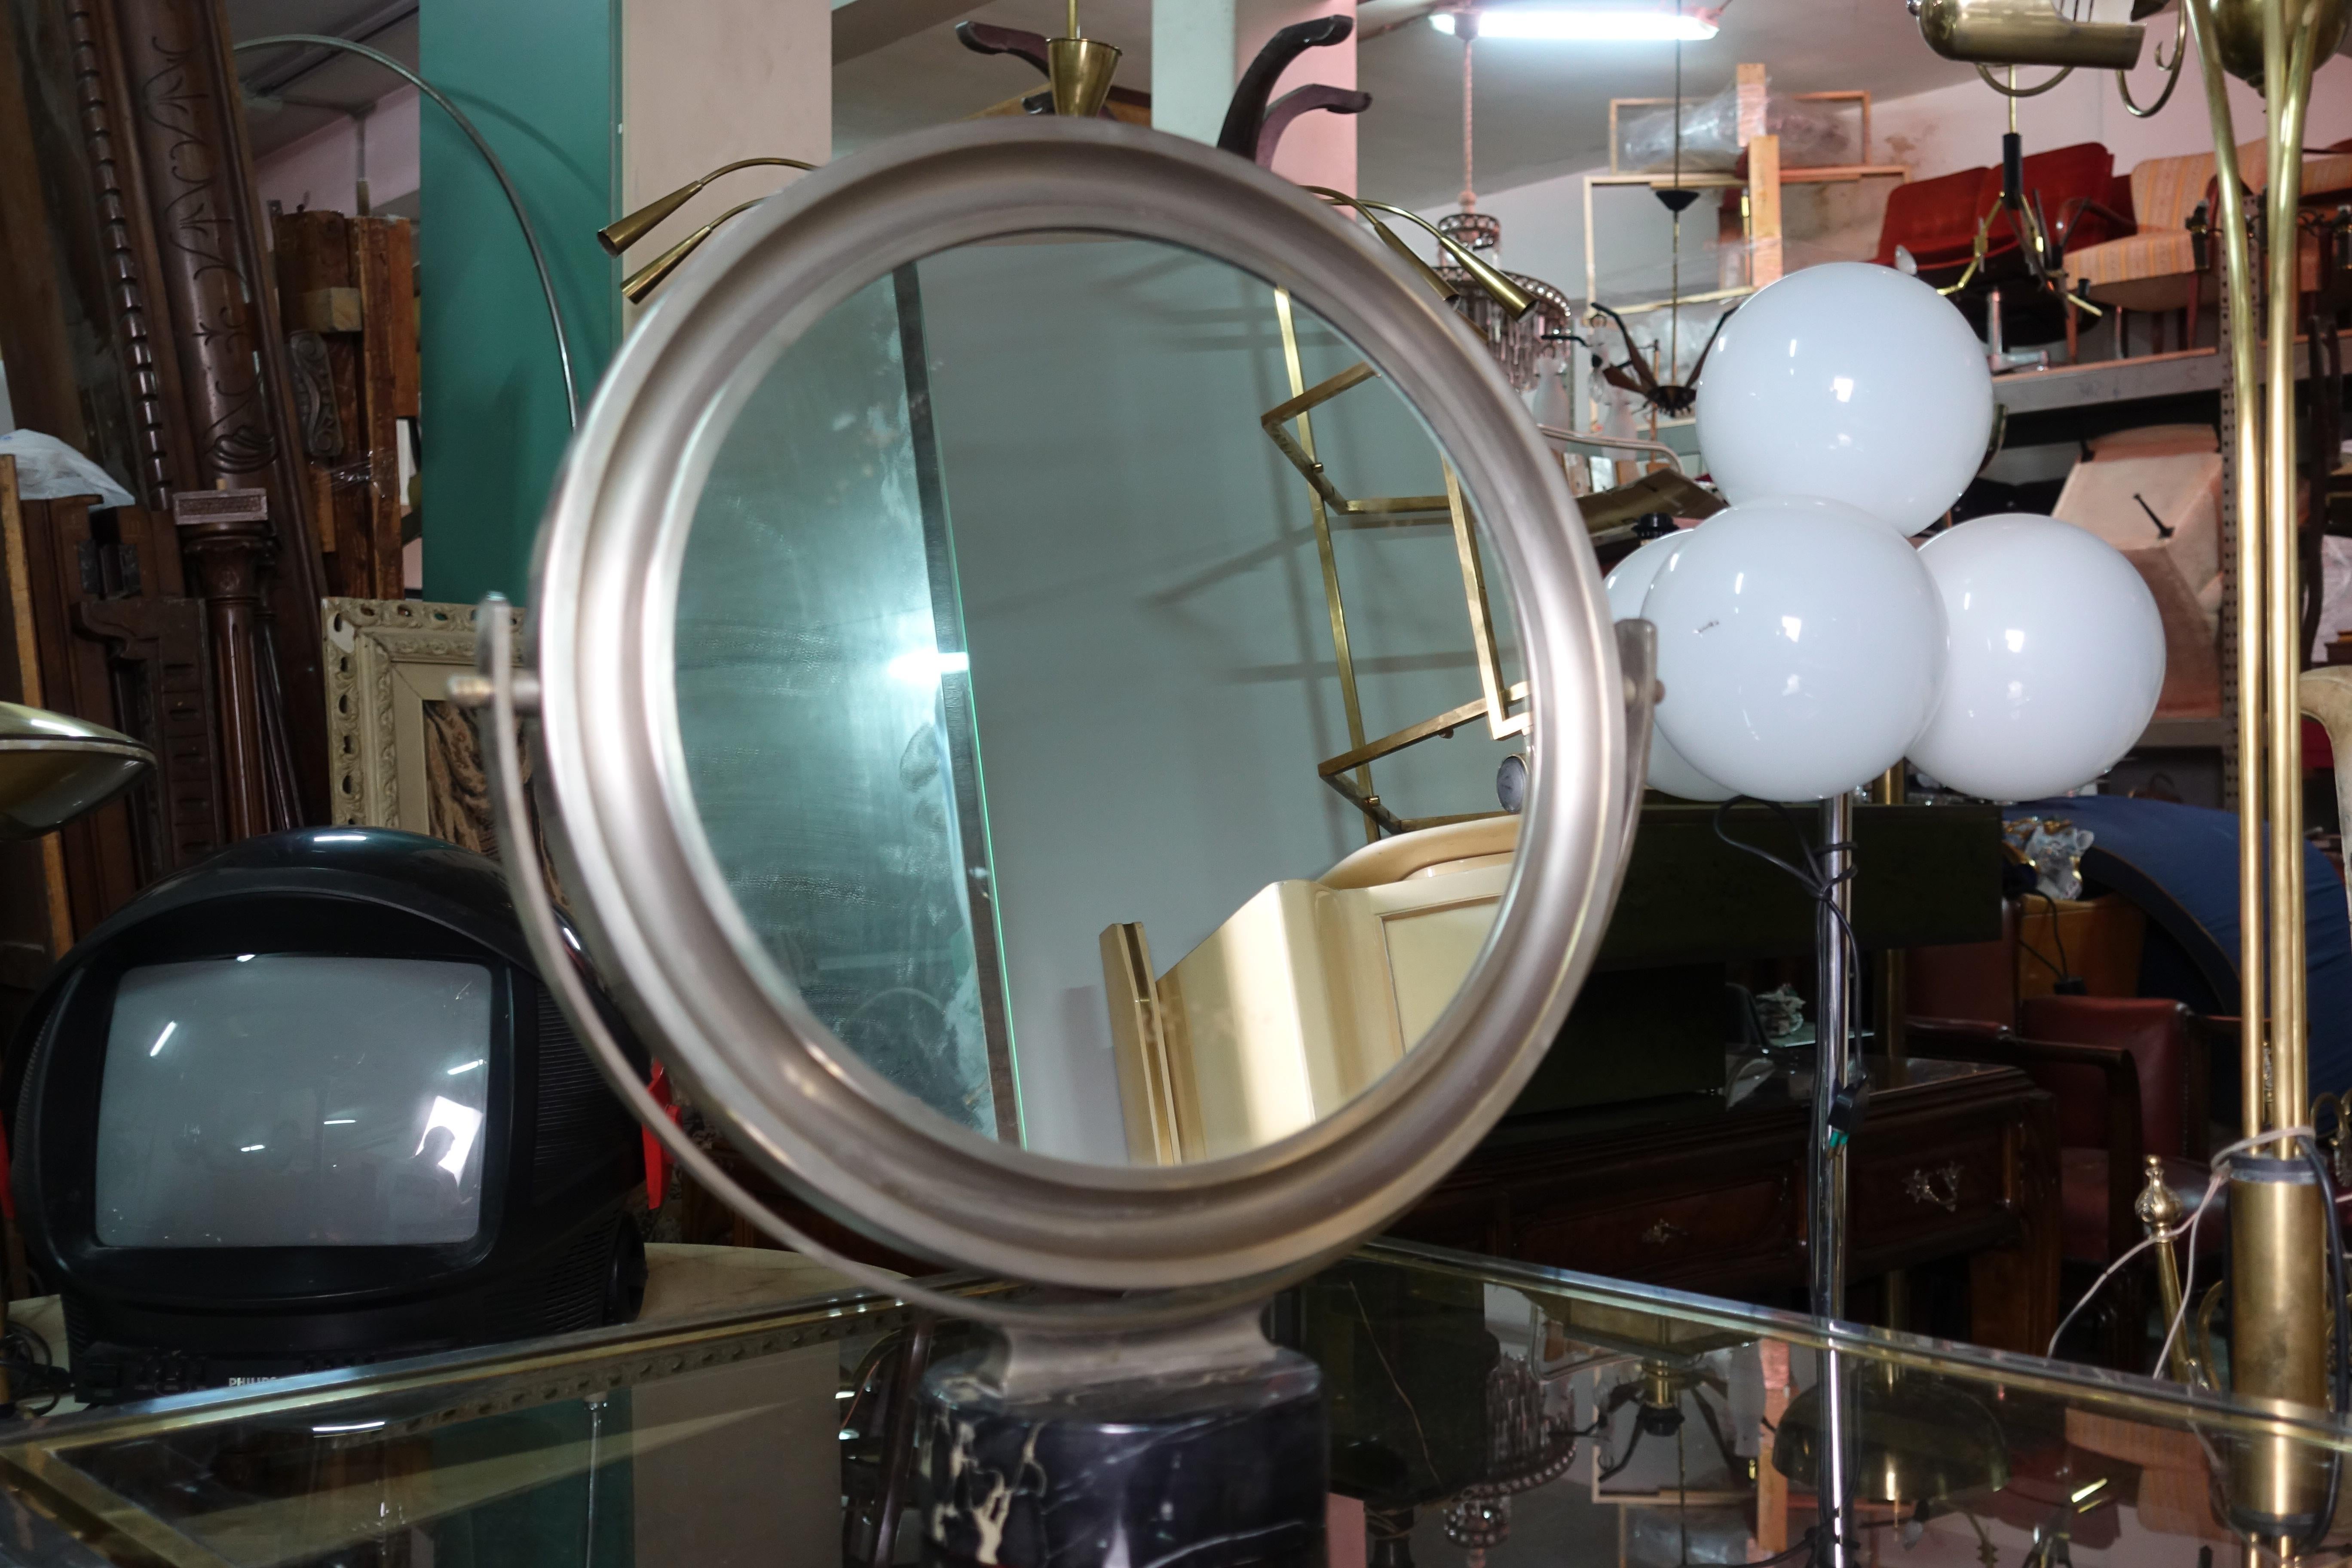 Amazing, Mid Century Modern, Sergio Mazza 'Narciso' mirror for Artemide 1960s 70
Sergio Mazza, was born in Milan in 1931. Among the various acknowledgments and awards received, we remember the mention to the 1960 Compasso d'Oro for the Delta lamp by